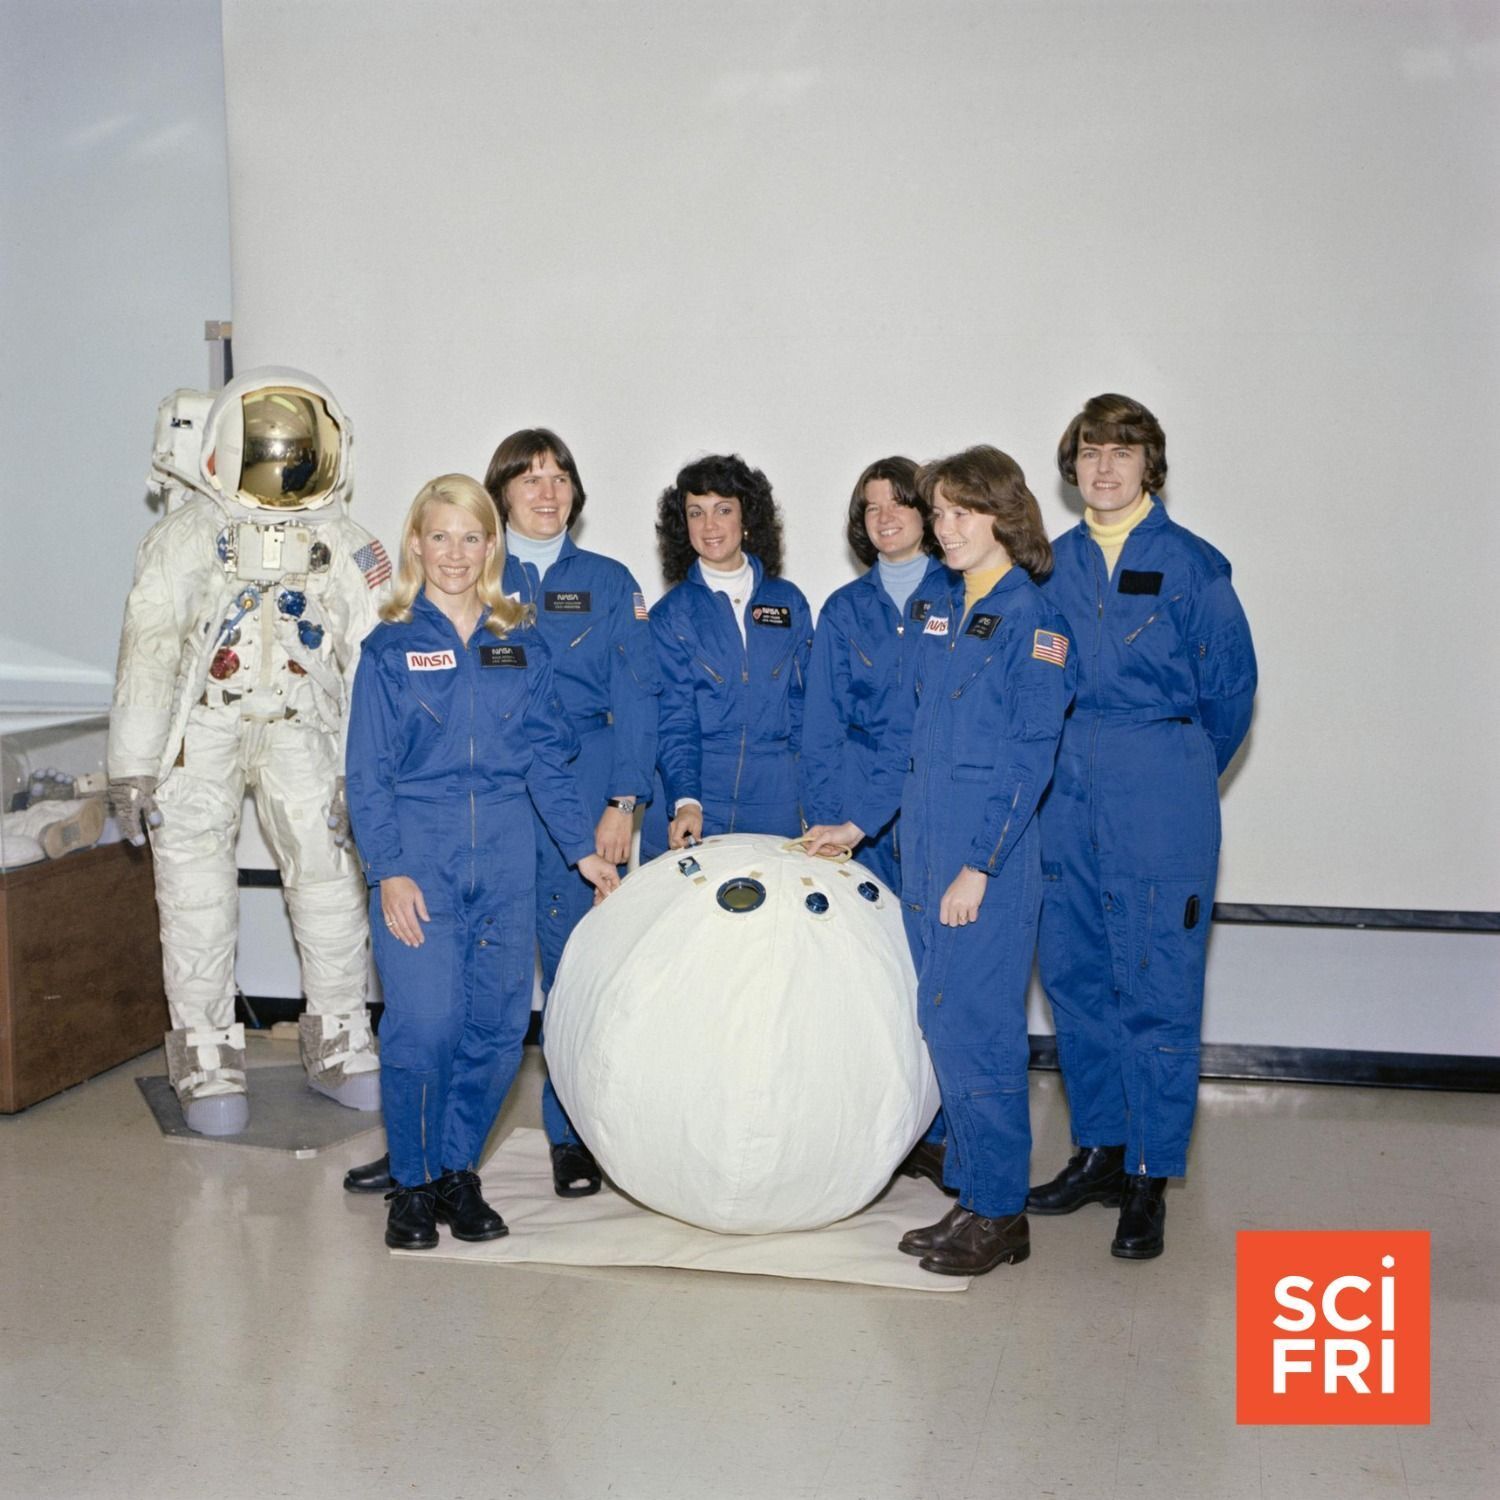 629: The Stories Of The First Six Women Astronauts